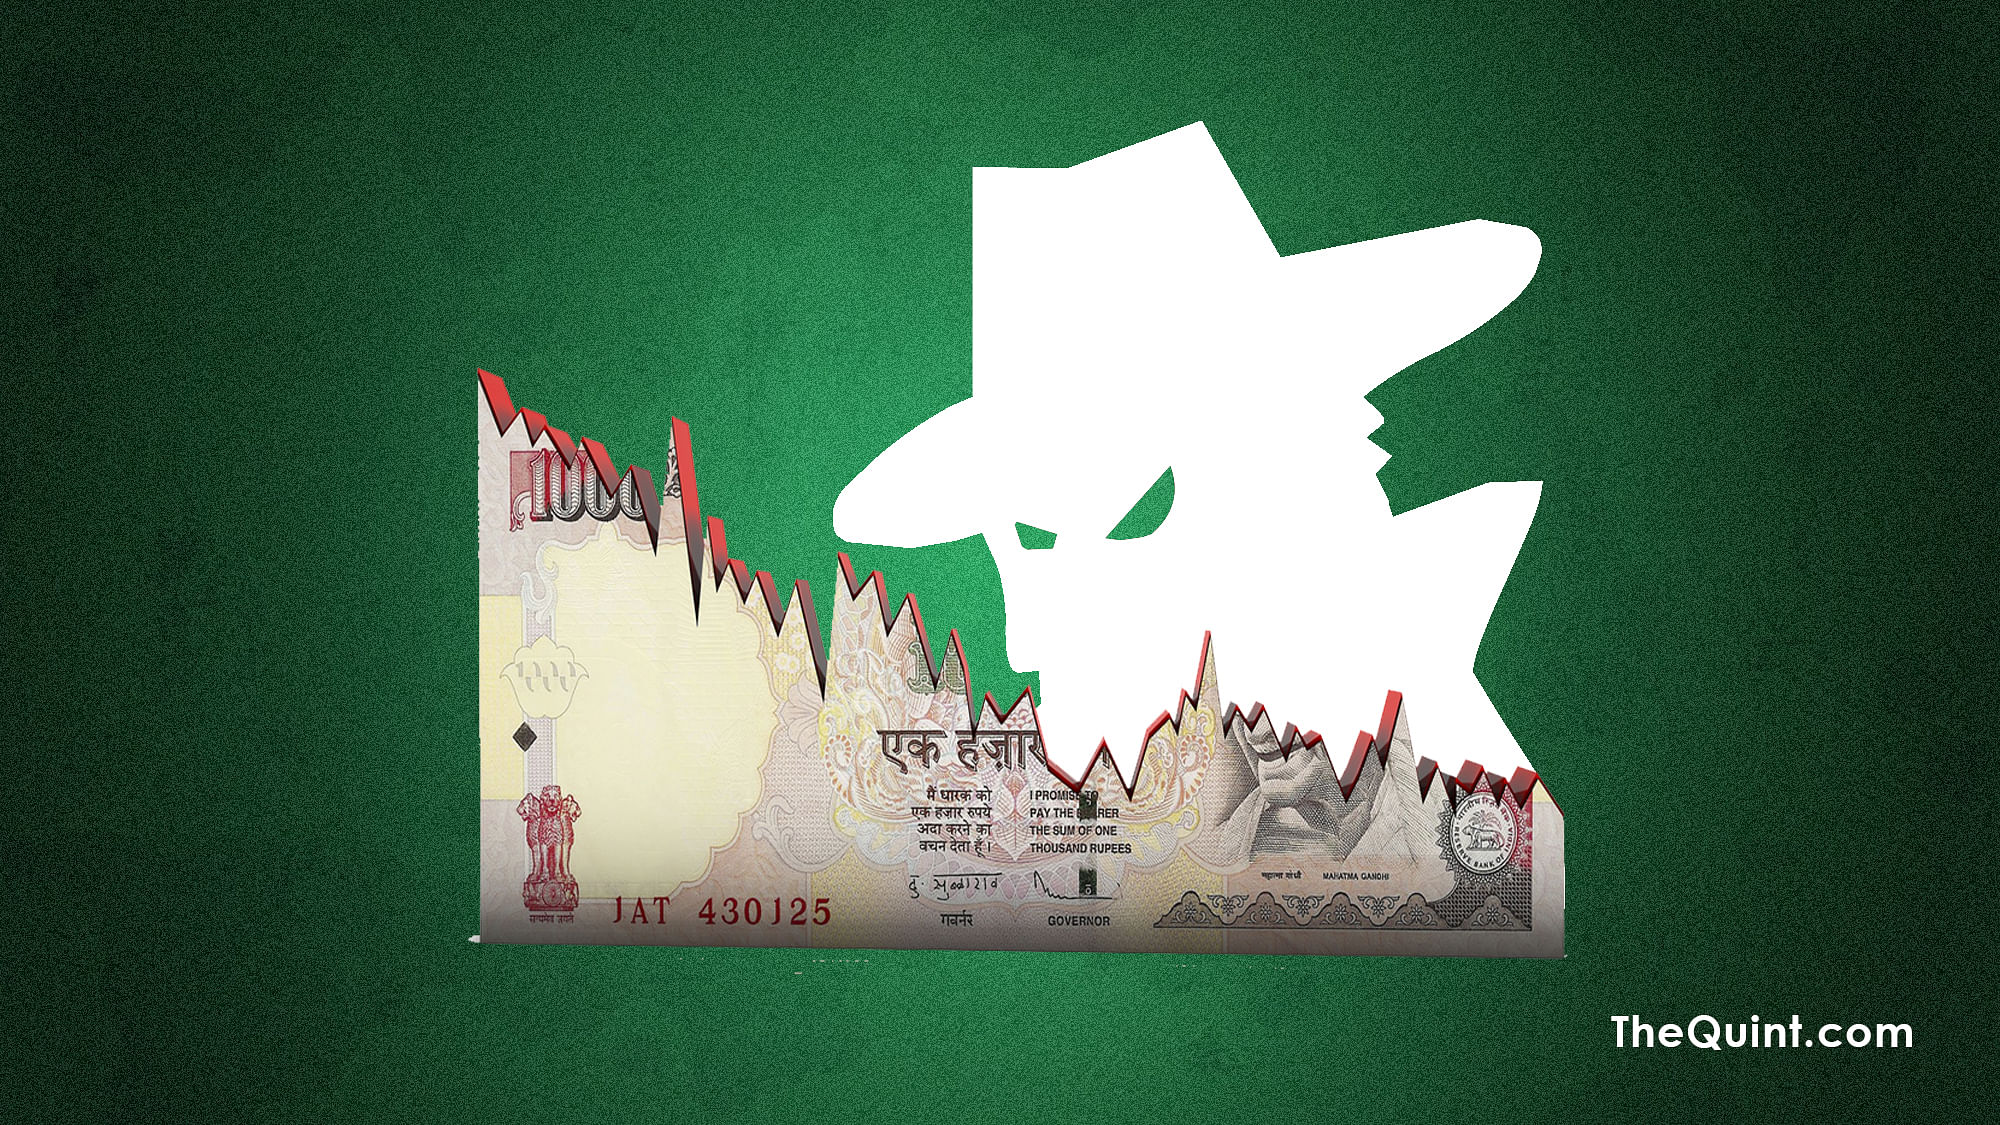 Looking for ways to turn your black money to white? There are ways, but with riders, of course (Aaqib Raza Khan/<b>TheQuint</b>)